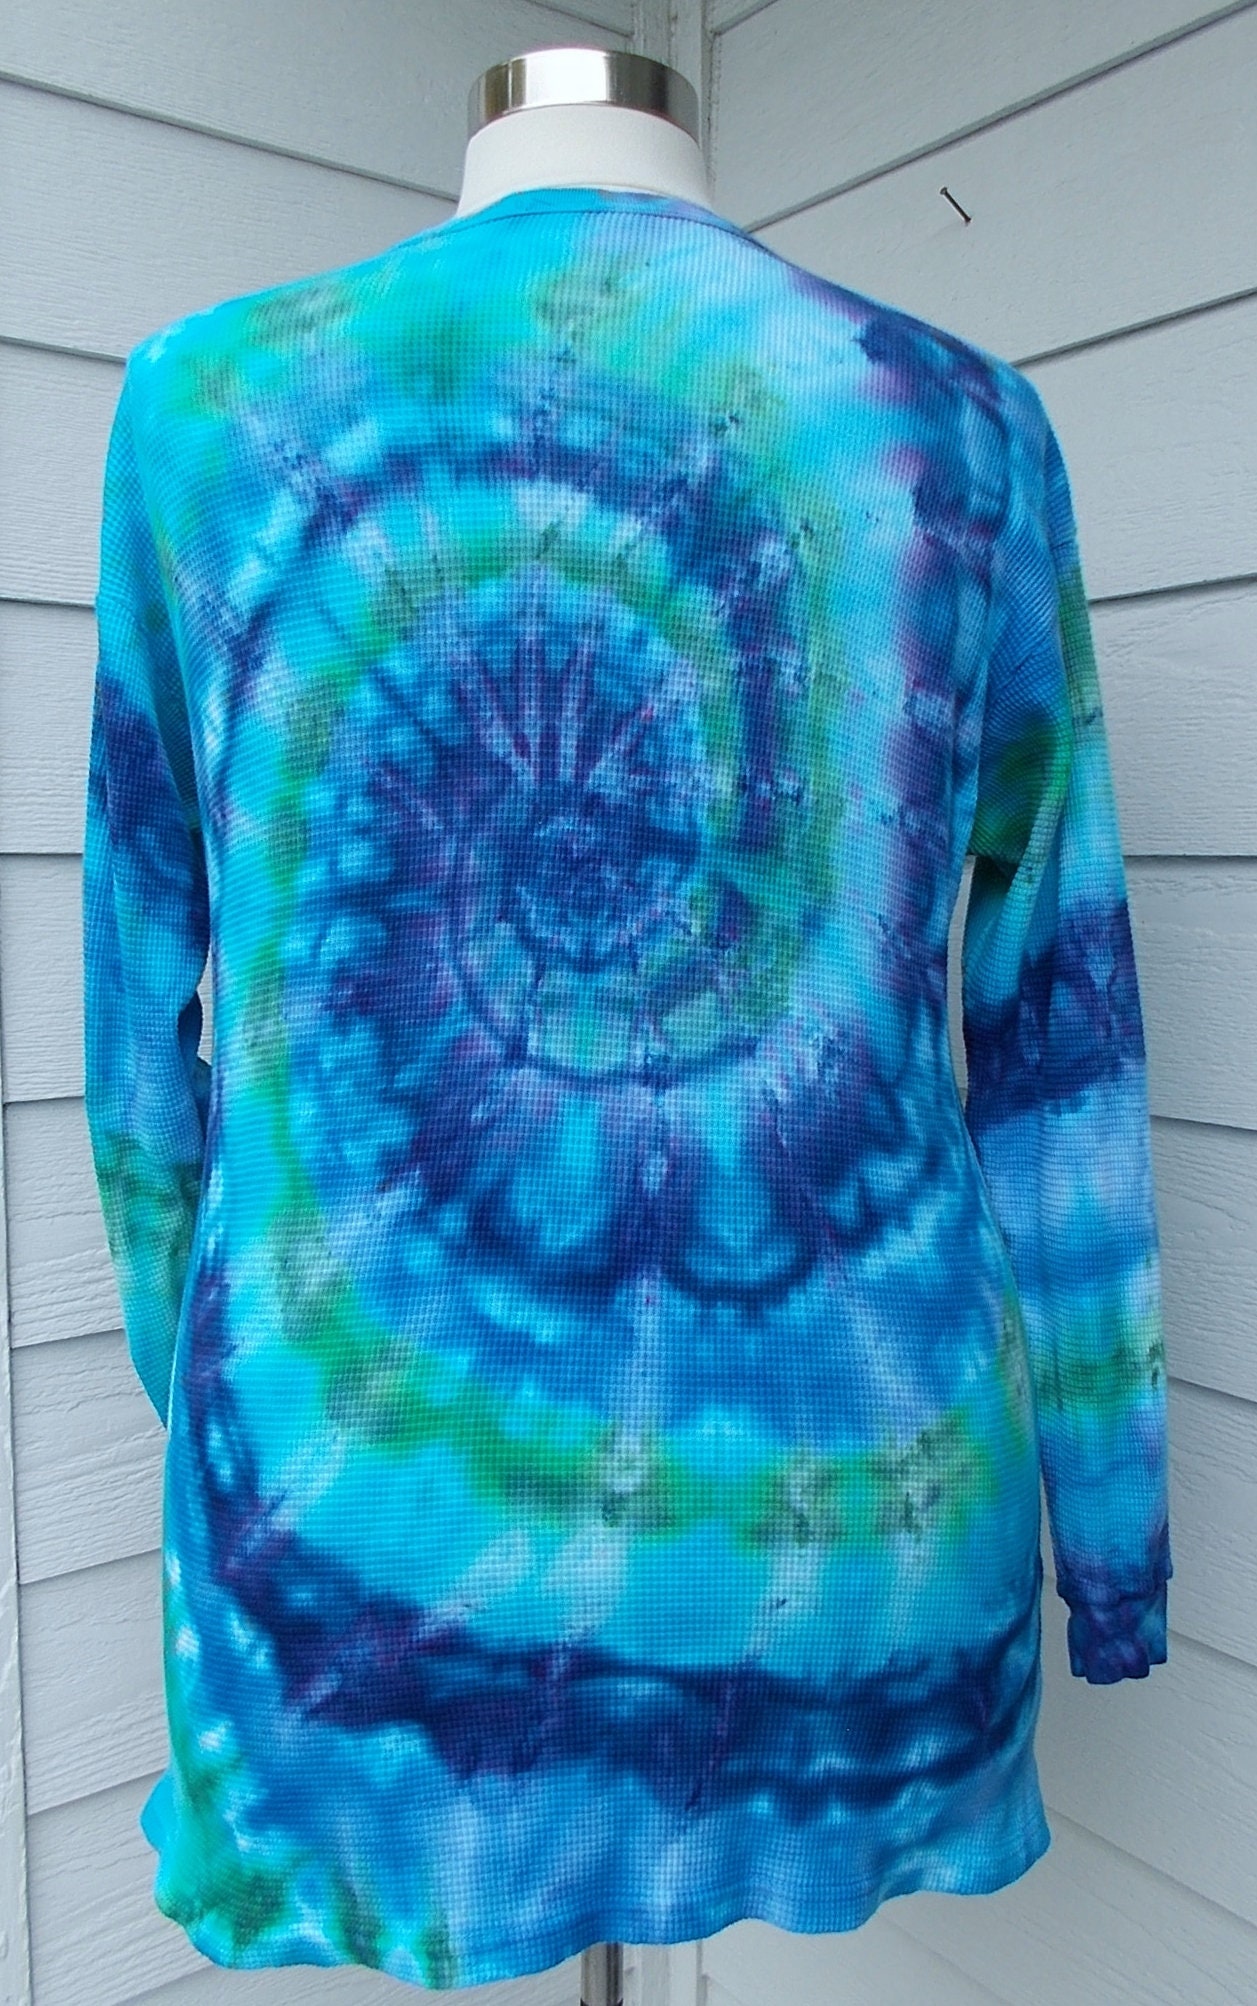 Ice-dyed Unisex Thermal Tops